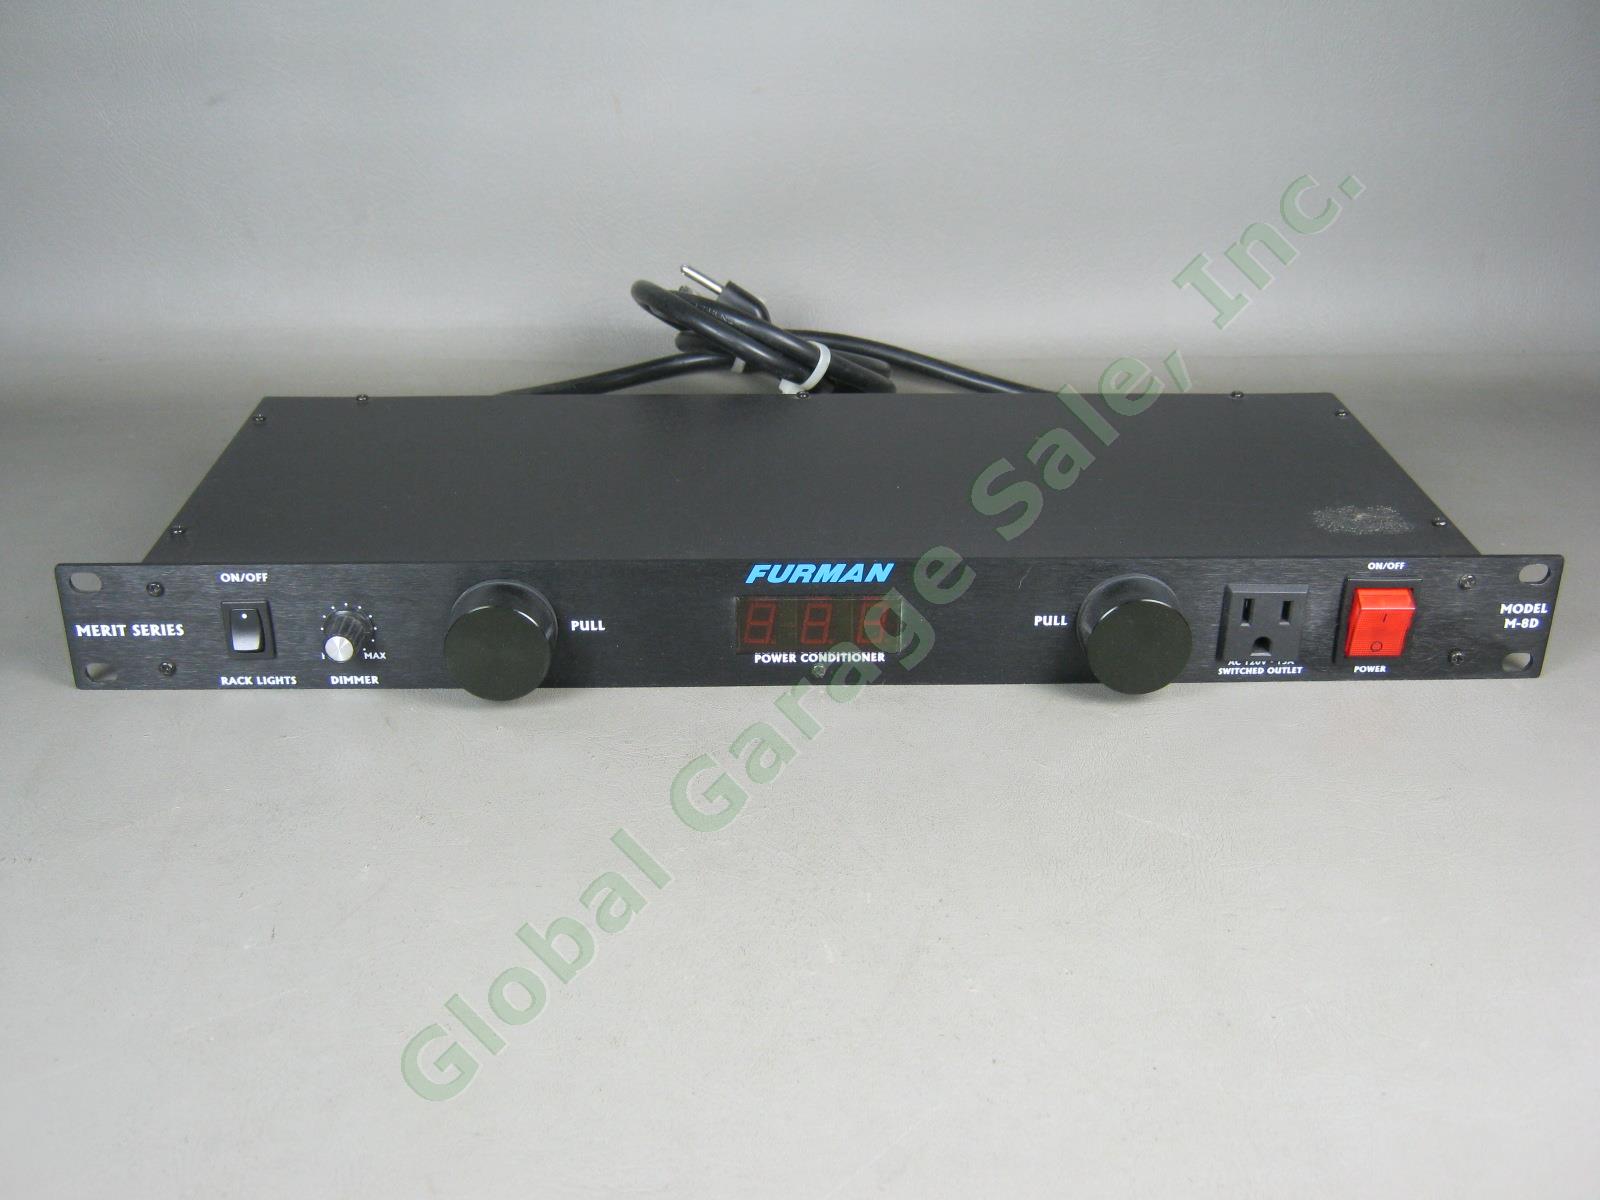 Furman Merit Series M-8D Rack Mount Power Conditioner One Owner No Reserve Price